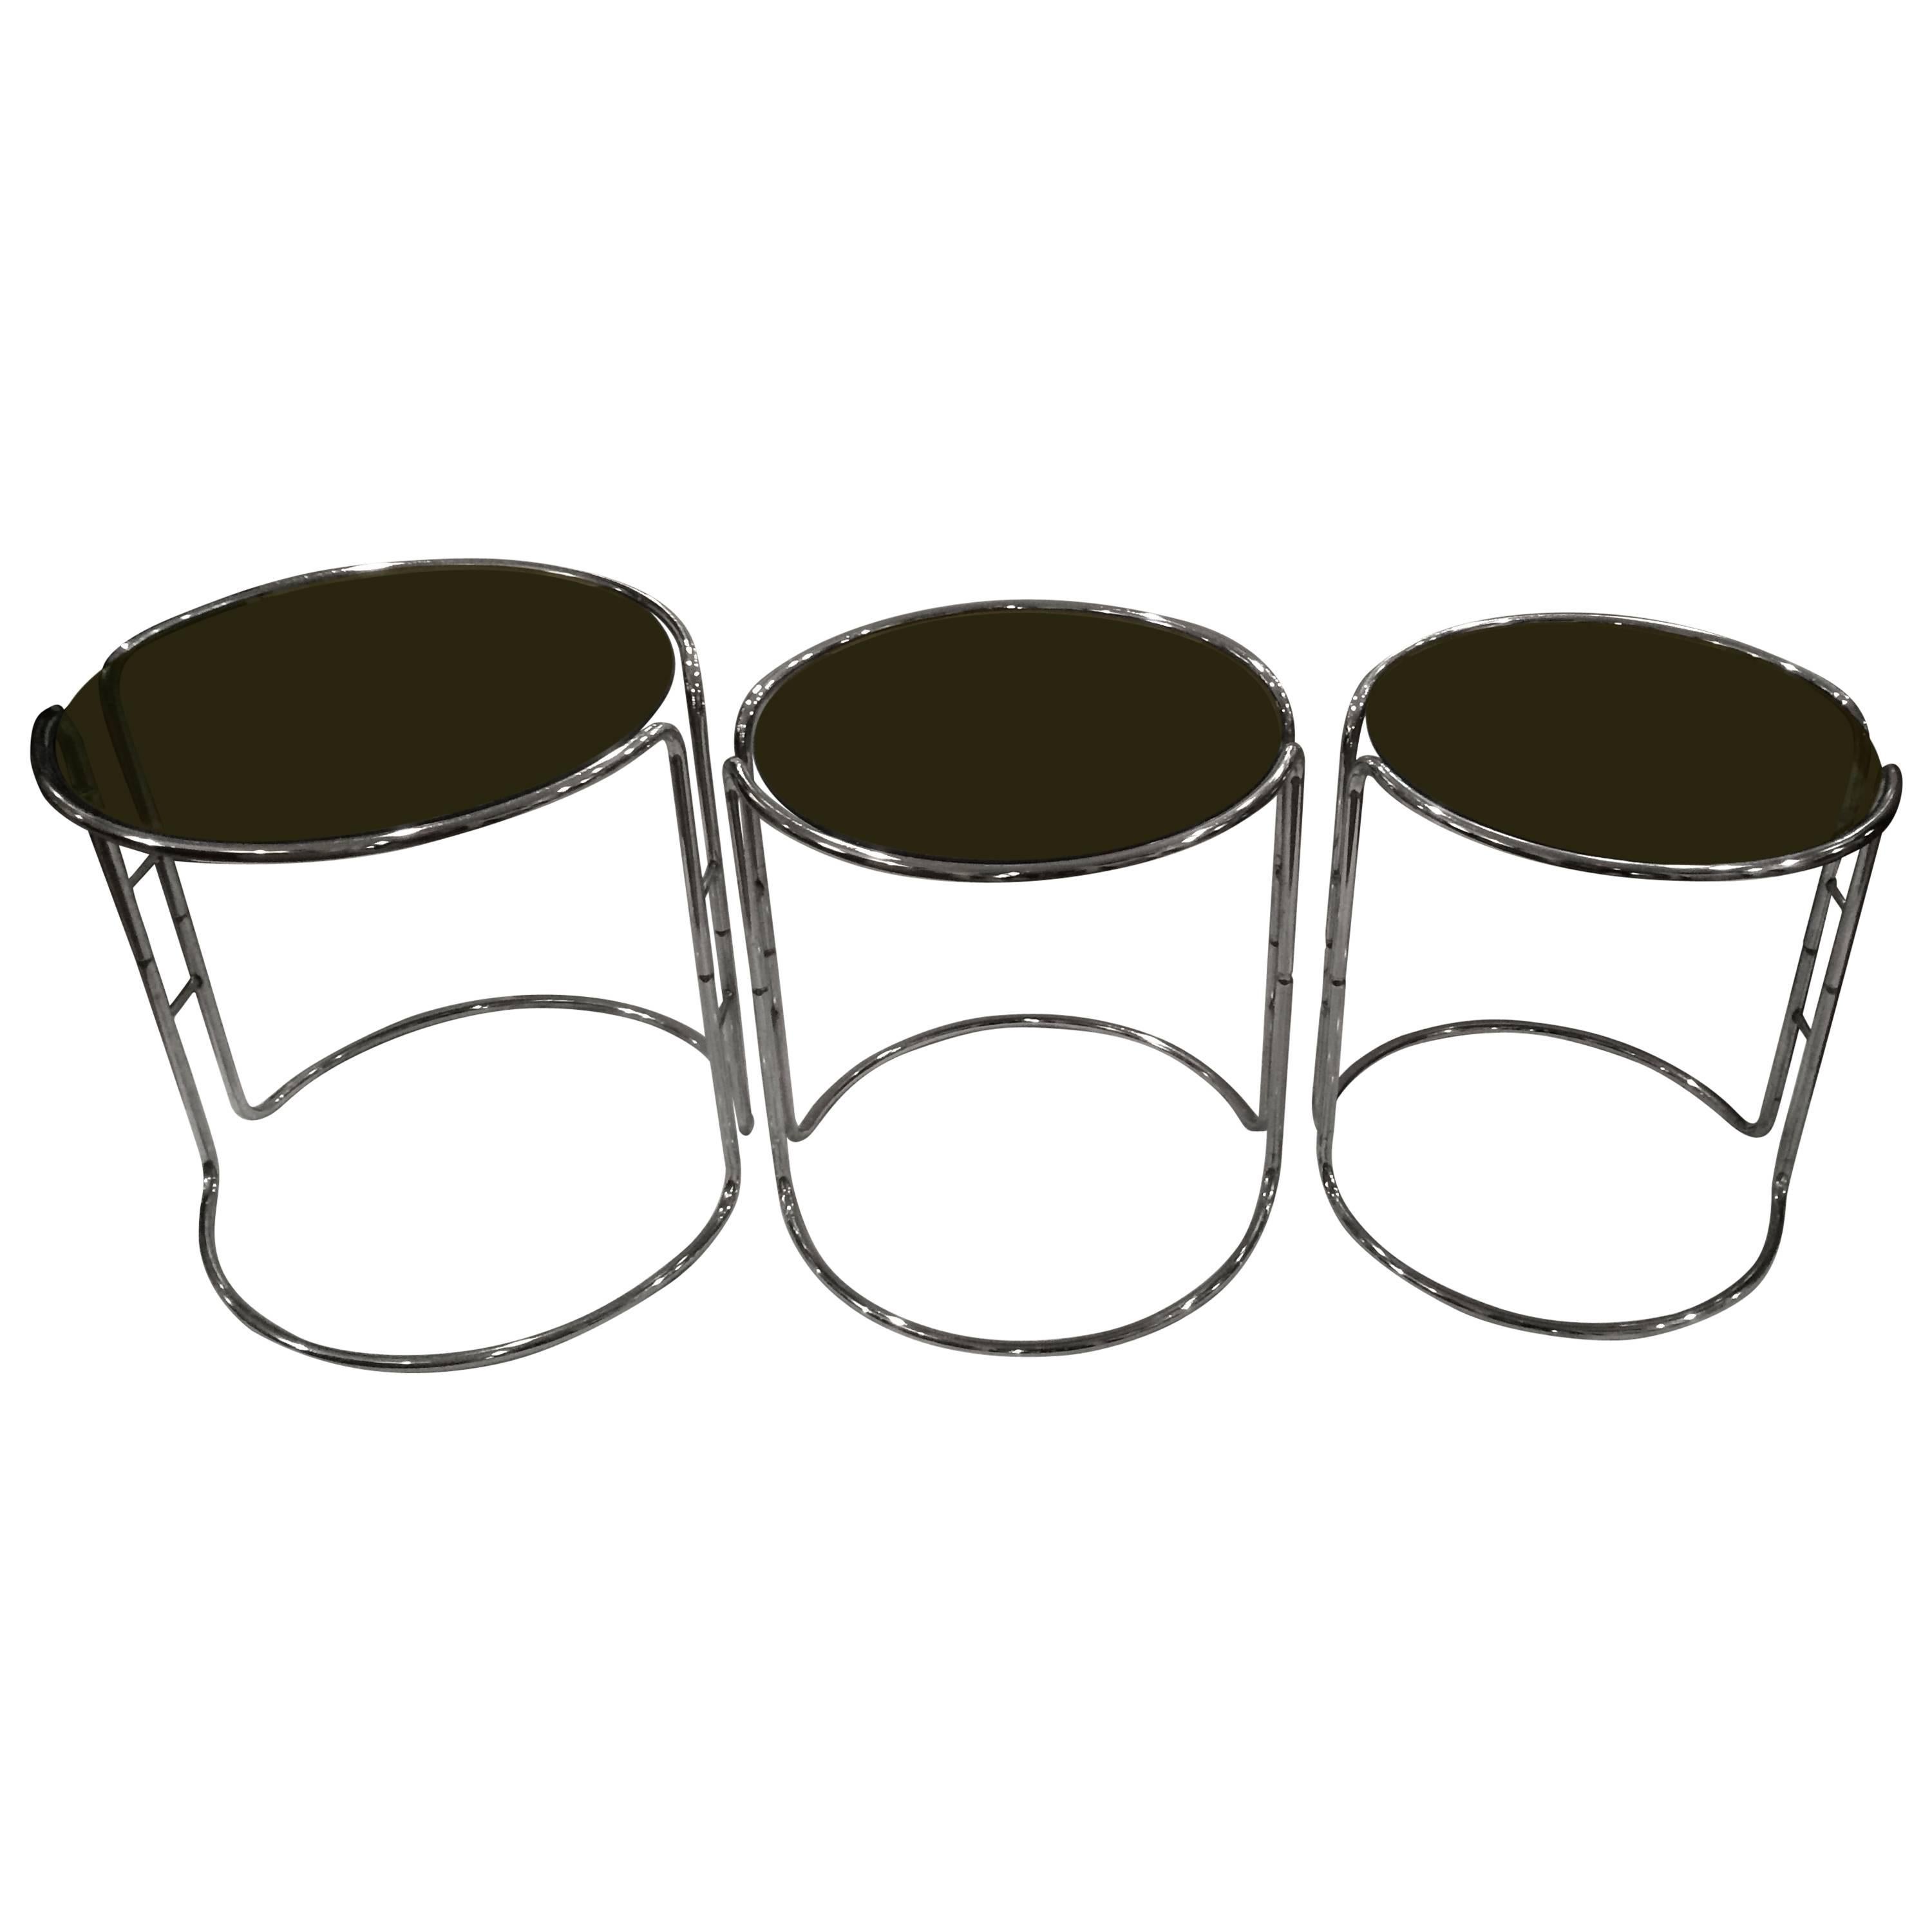 Set of Three Milo Baughman Chrome and Smoked Glass Stacking Tables